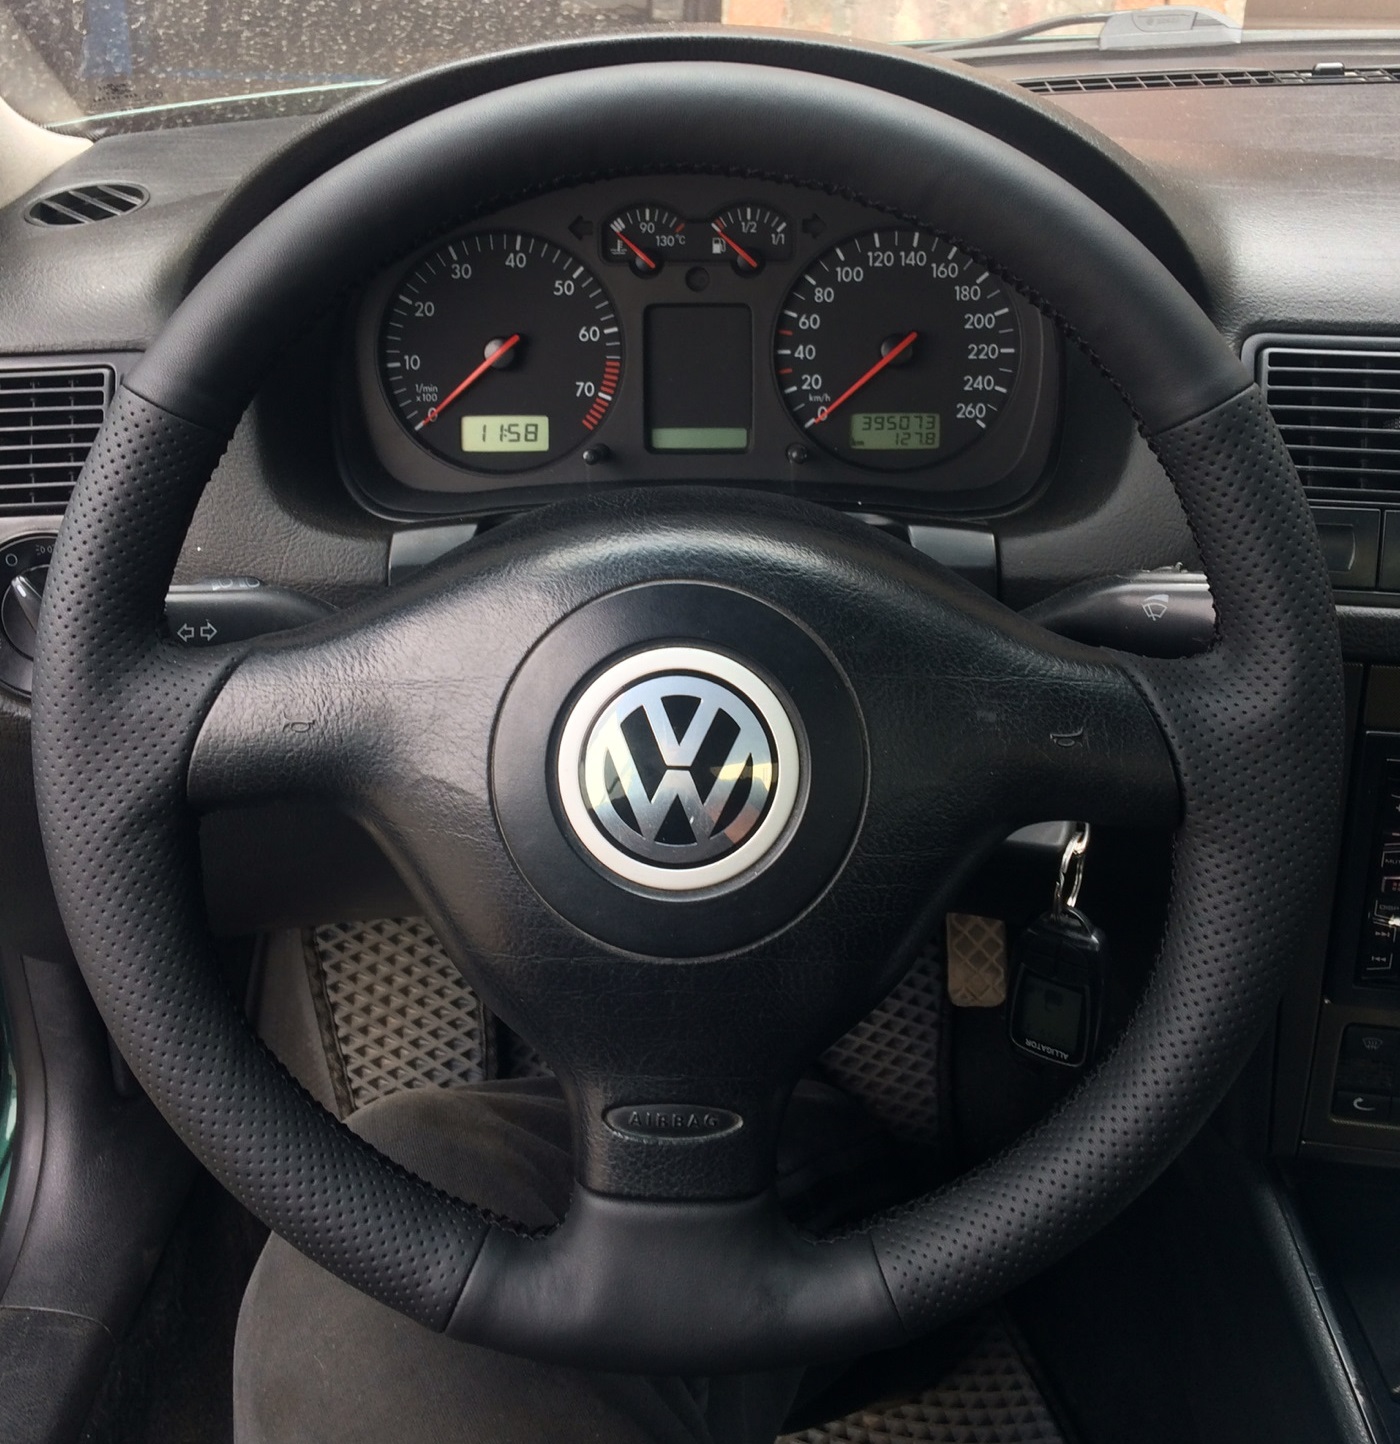 Steering wheel COVER for VW PASSAT B5 Bora Golf 4 Polo Seat Leon Eco Leather For Sewing